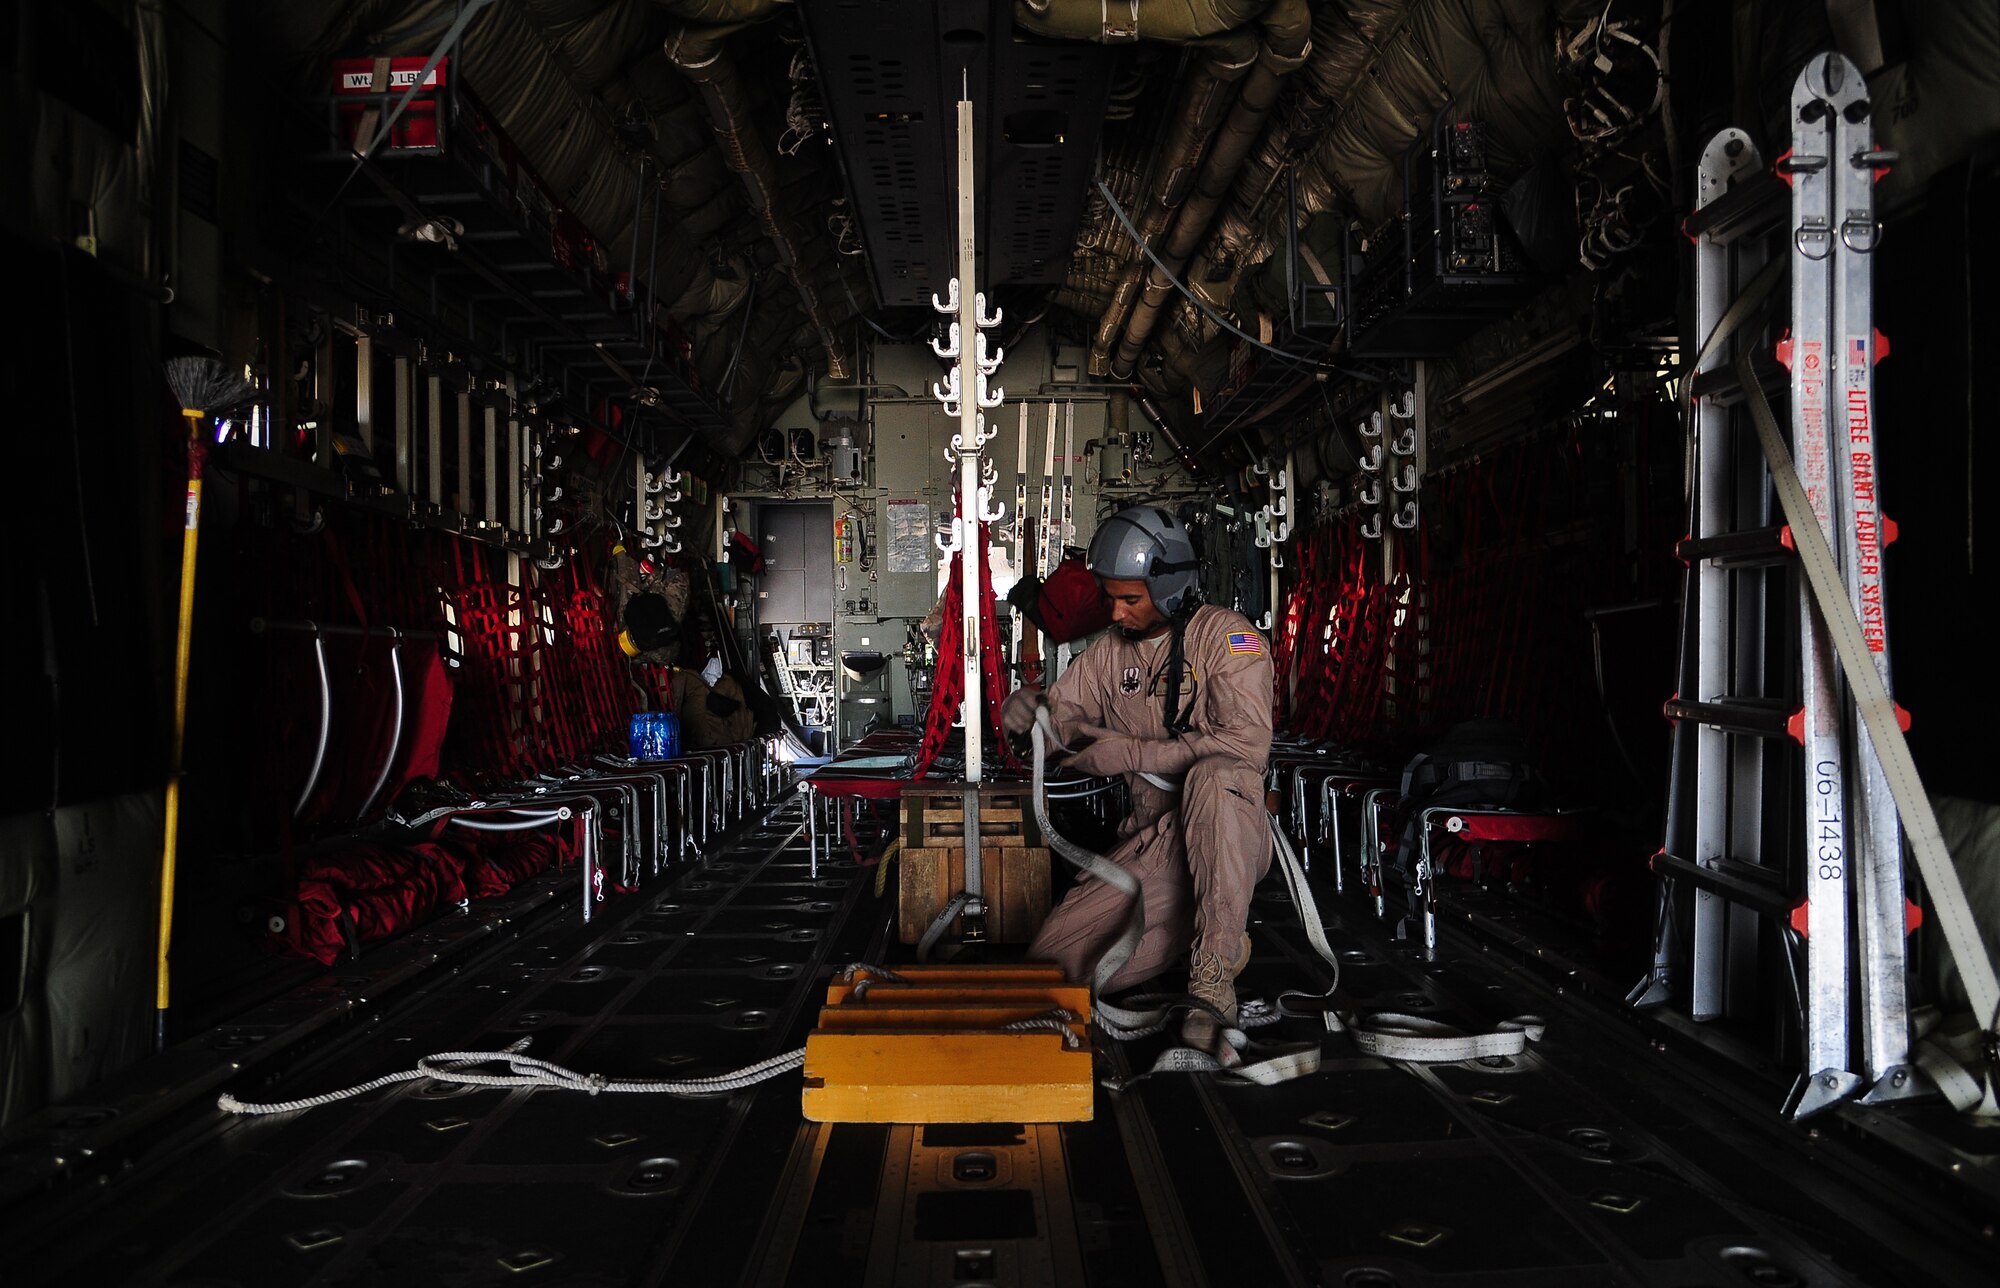 U.S. Senior Airman Cameron Davis, a loadmaster with the 115th Airlift Squadron at Channel Islands Air National Guard Station, Calif., prepares a C-130J Hercules for a mission during Exercise Eager Lion May 26, 2014, at an air base in northern Jordan. Throughout the exercise, Guardsmen from the 115th provided airlift support for U.S. and partner nation aircraft that were practicing various missions. (U.S. Air Force photo by Staff Sgt. Brigitte N. Brantley/Released)